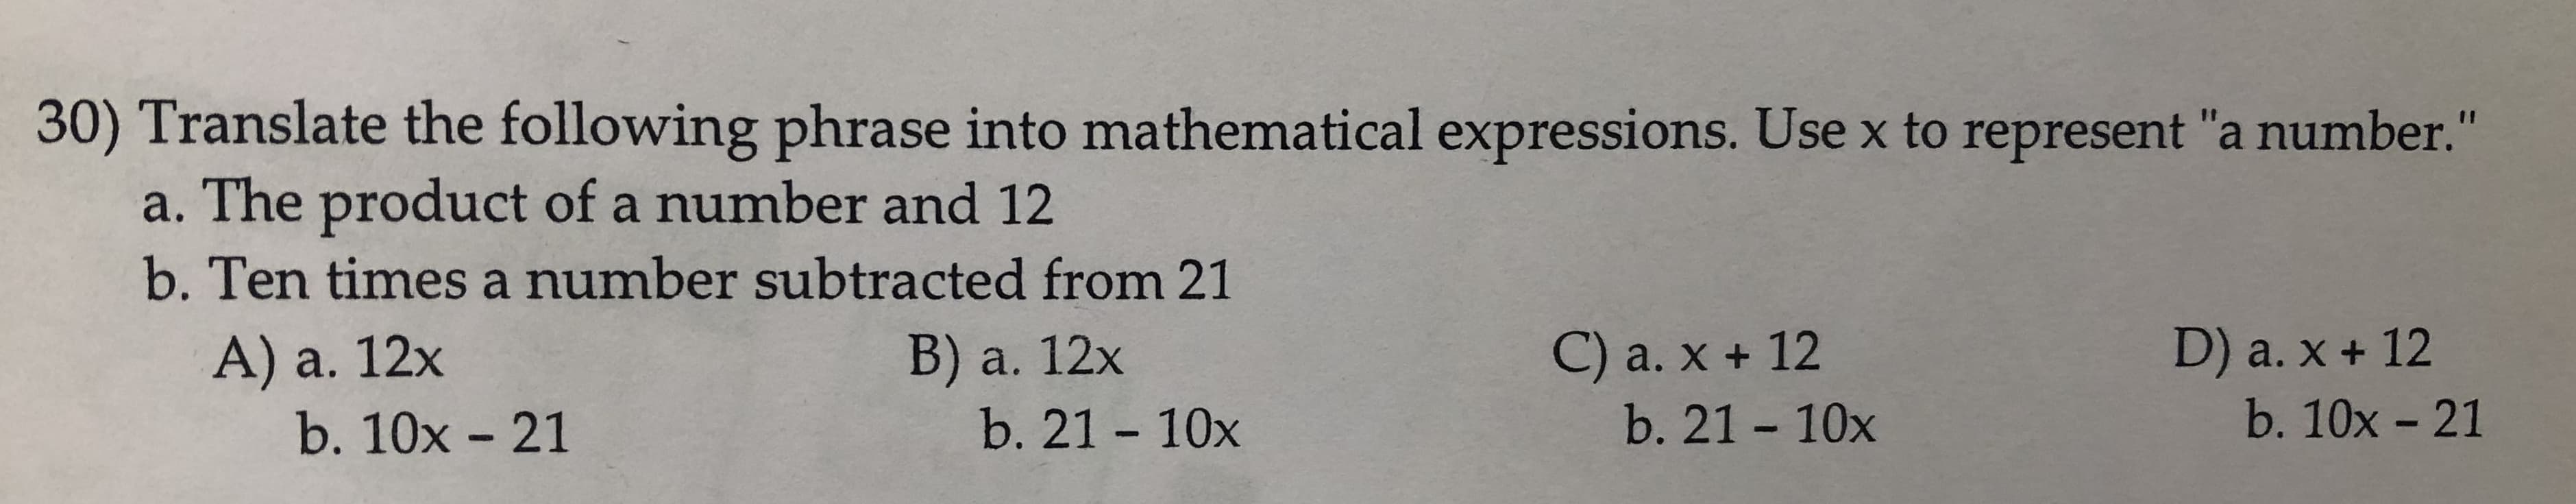 30) Translate the following phrase into mathematical expressions. Use x to represent "a number."
a. The product of a number and 12
b. Ten times a number subtracted from 21
В) a. 12х
b. 21 10x
D) a. x + 12
C) a. x + 12
A) a. 12x
b. 10x - 21
b. 21 - 10x
b. 10x 21
